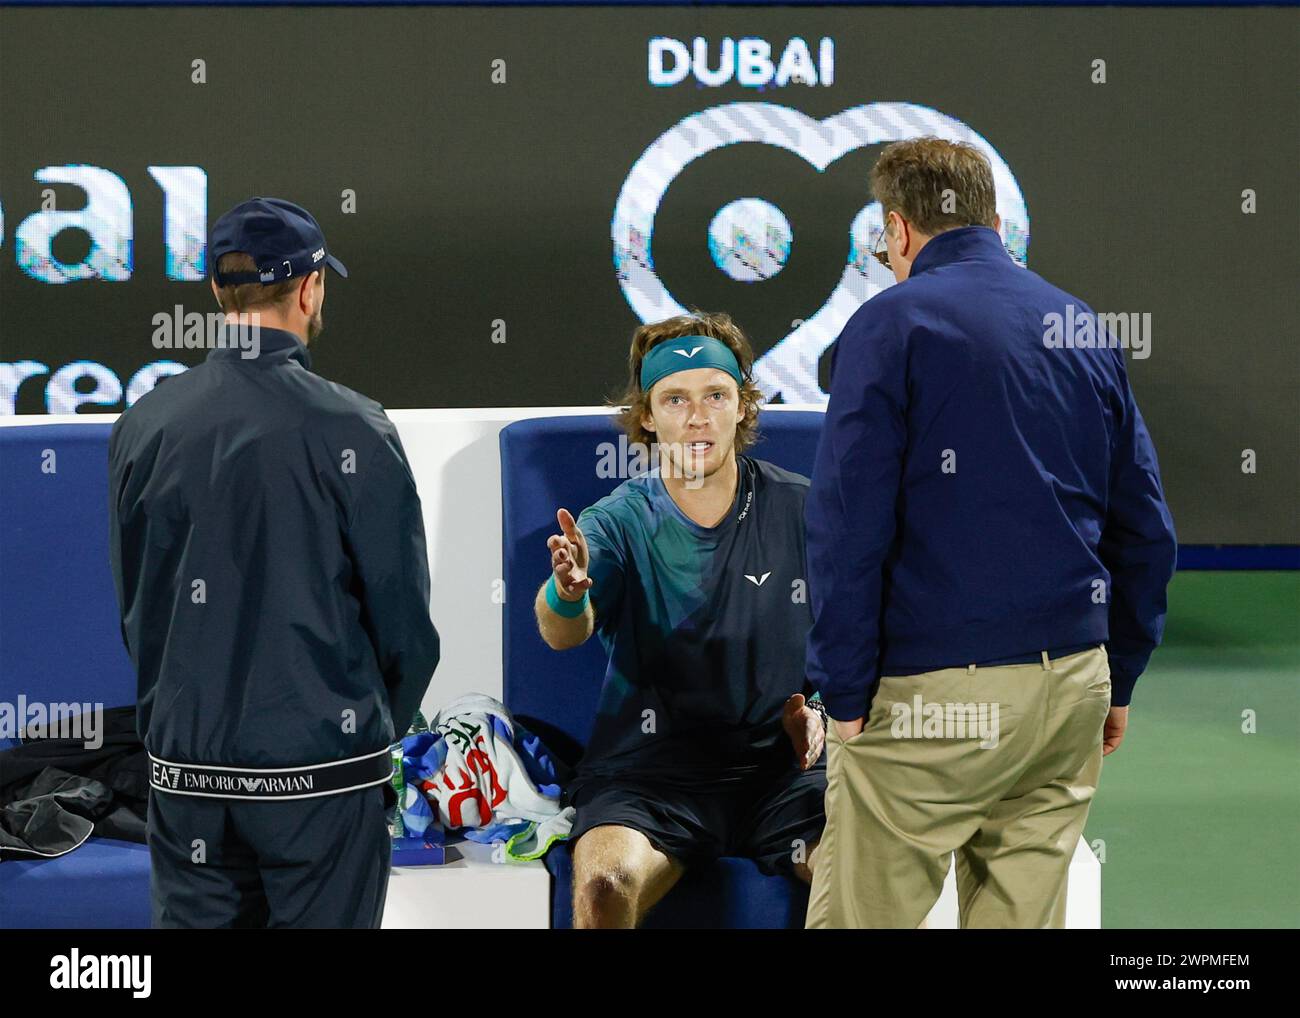 Andrey Rublev being informed by the ATP supervisor that he has been defaulted for using abusive language towards a linesperson at the Dubai Duty Free Stock Photo